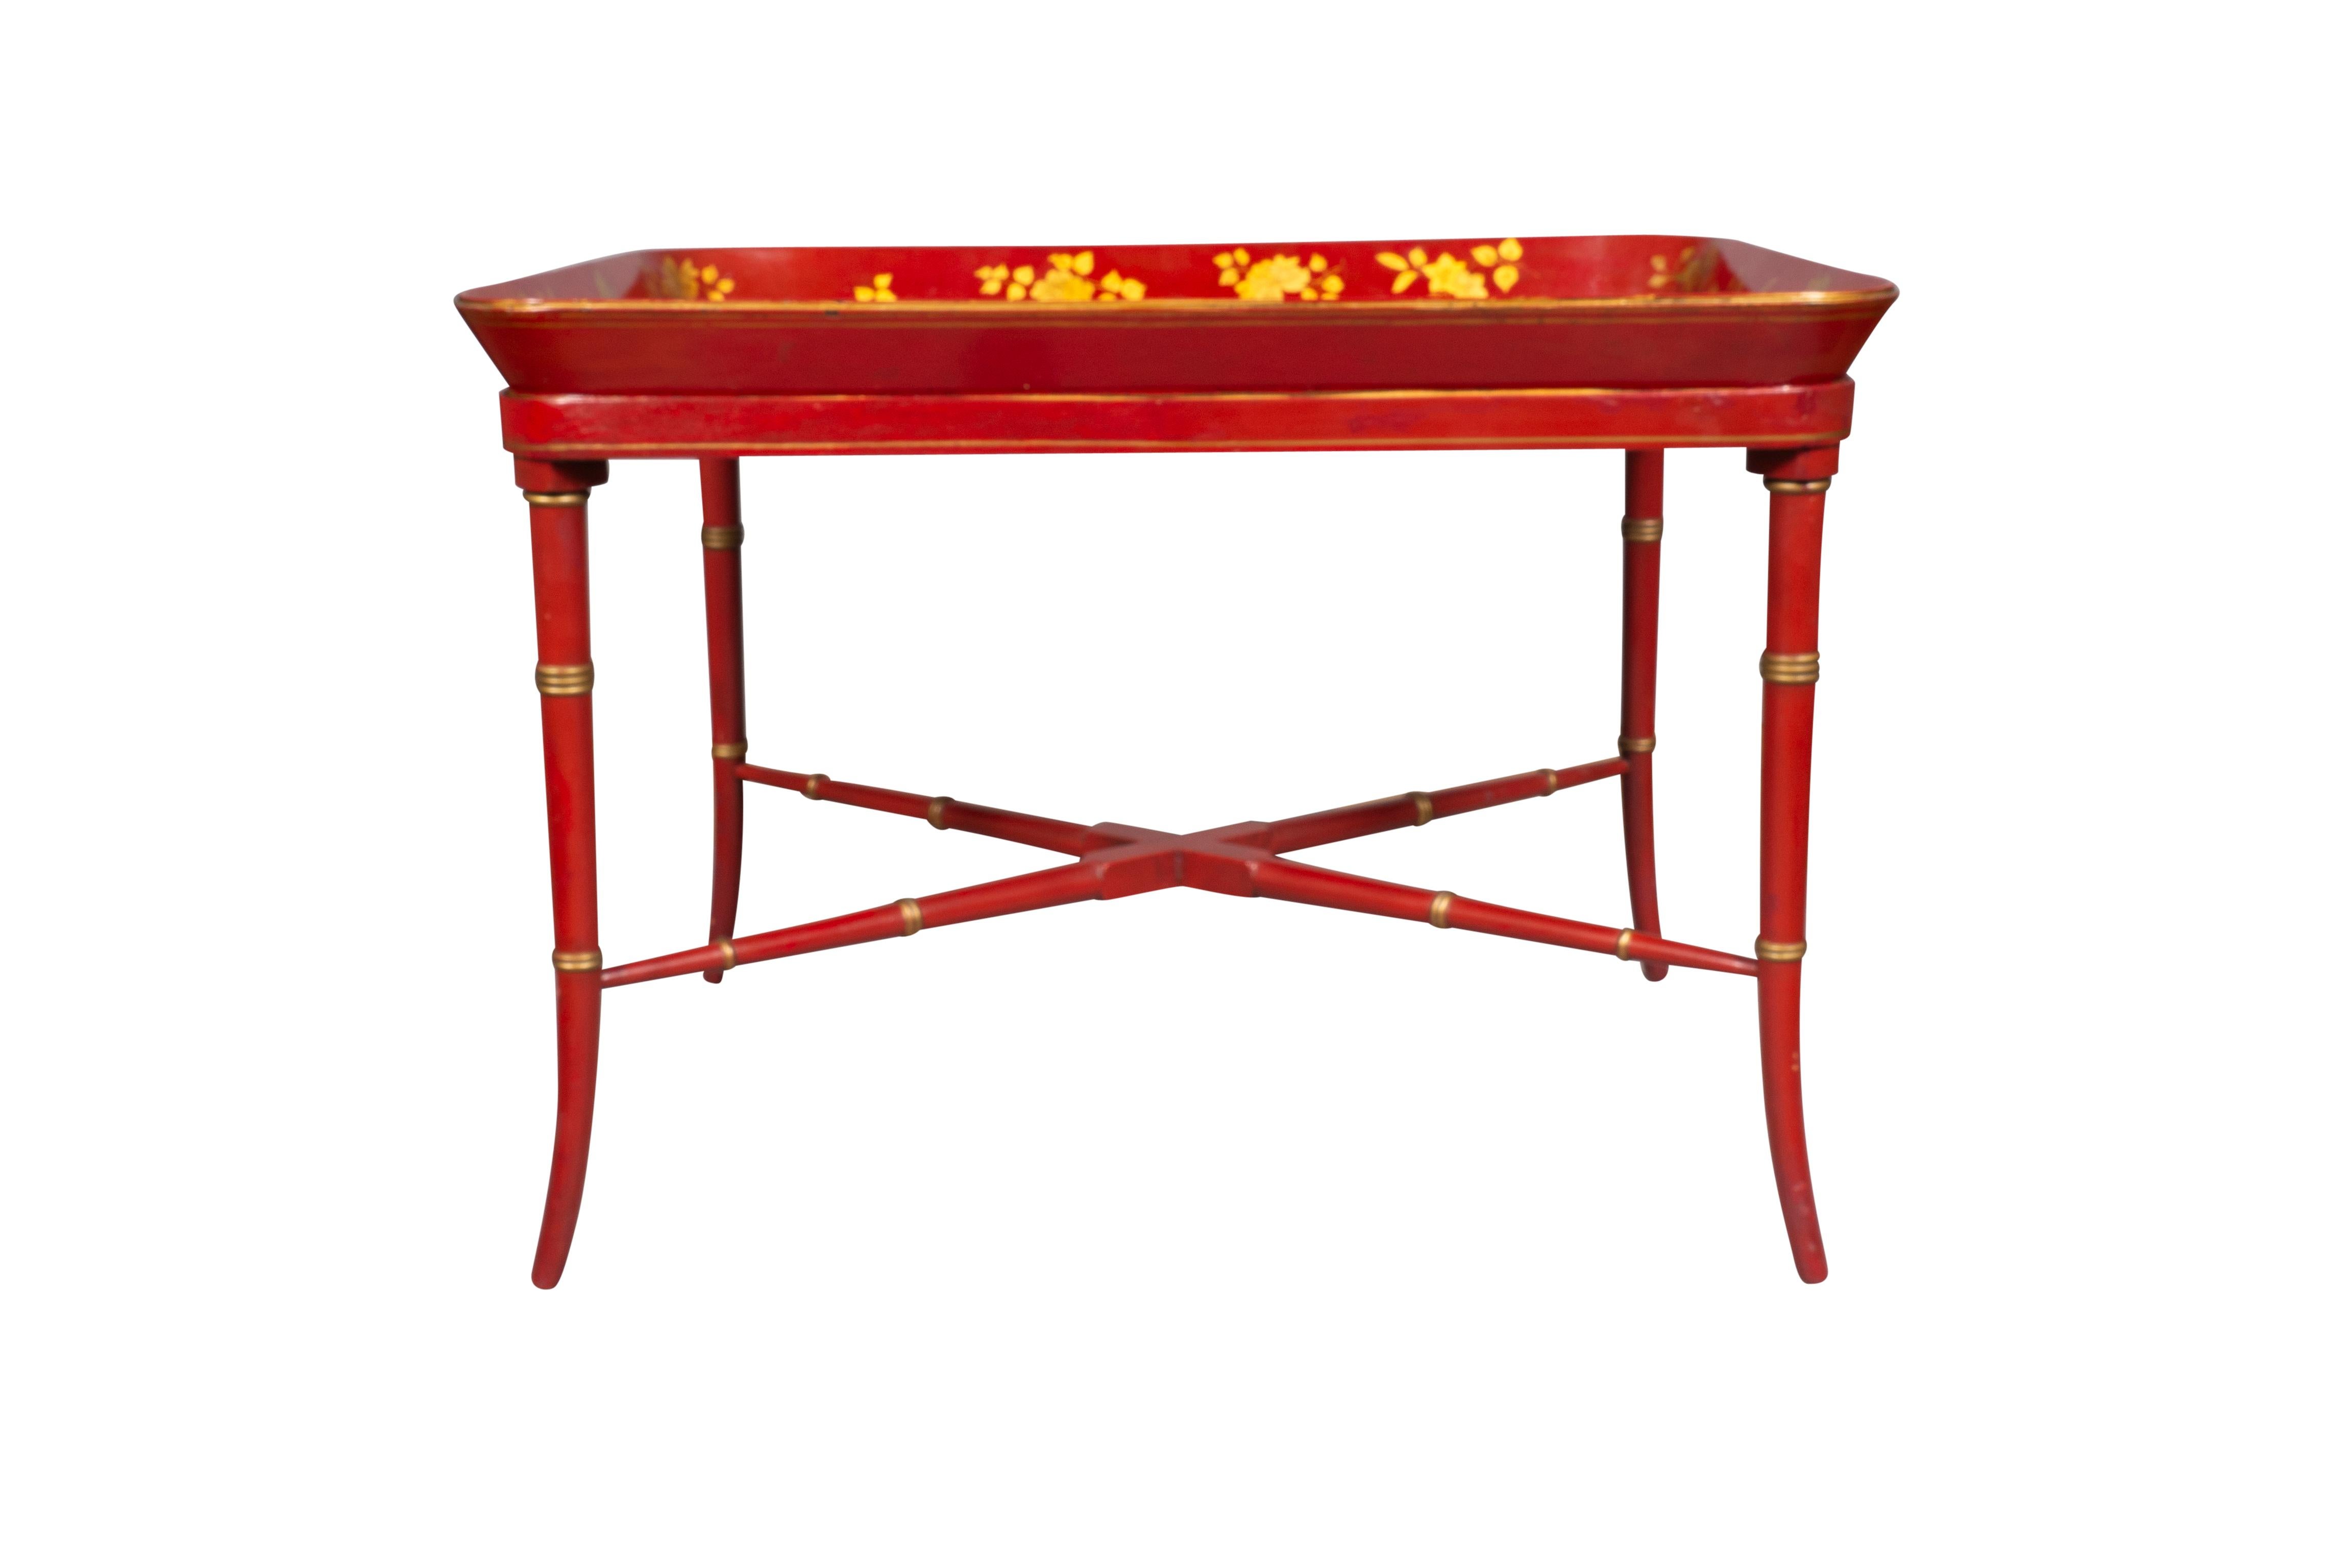 Rectangular with a brilliant red ground with leaves and flowers and butterflies in gilt. The base with faux bamboo legs and stretcher. Ex- Hyde Park Antiques NYC.